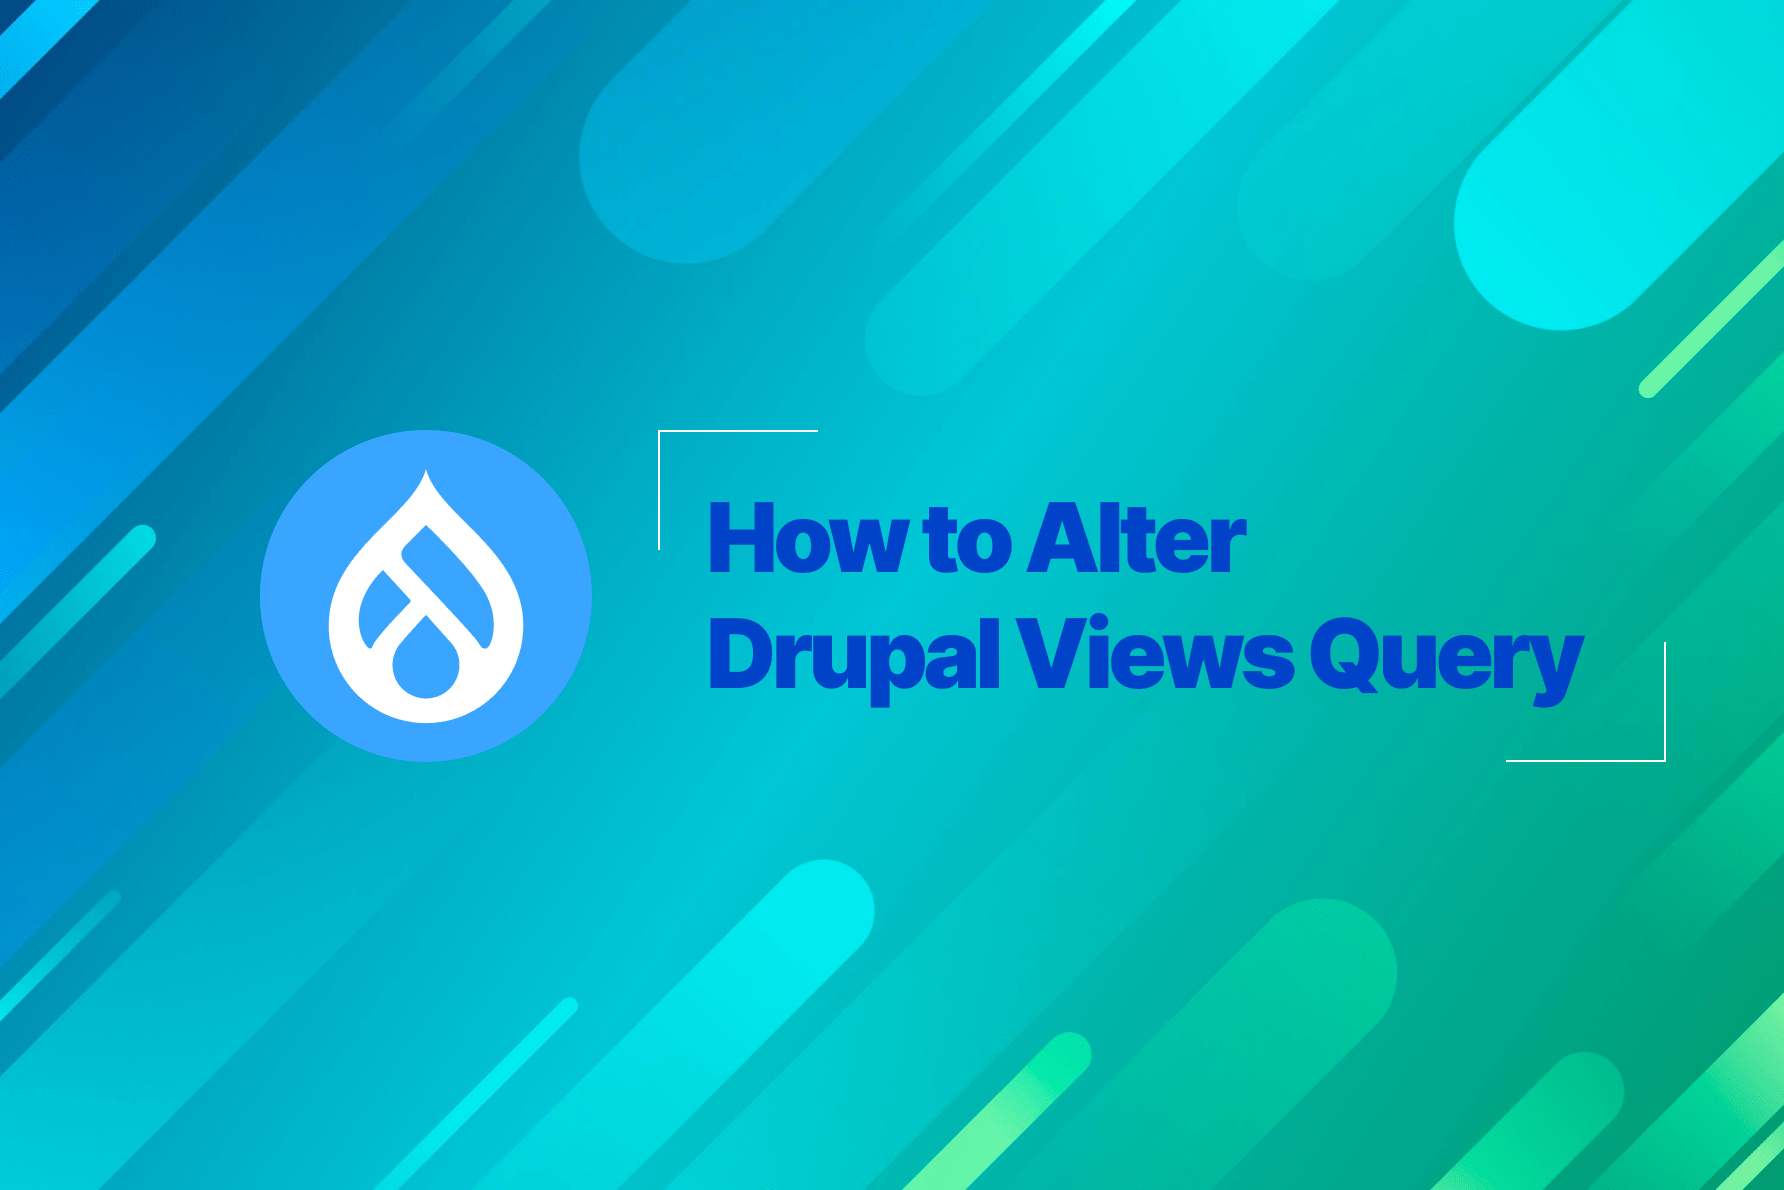 How to Alter Drupal Views Query image